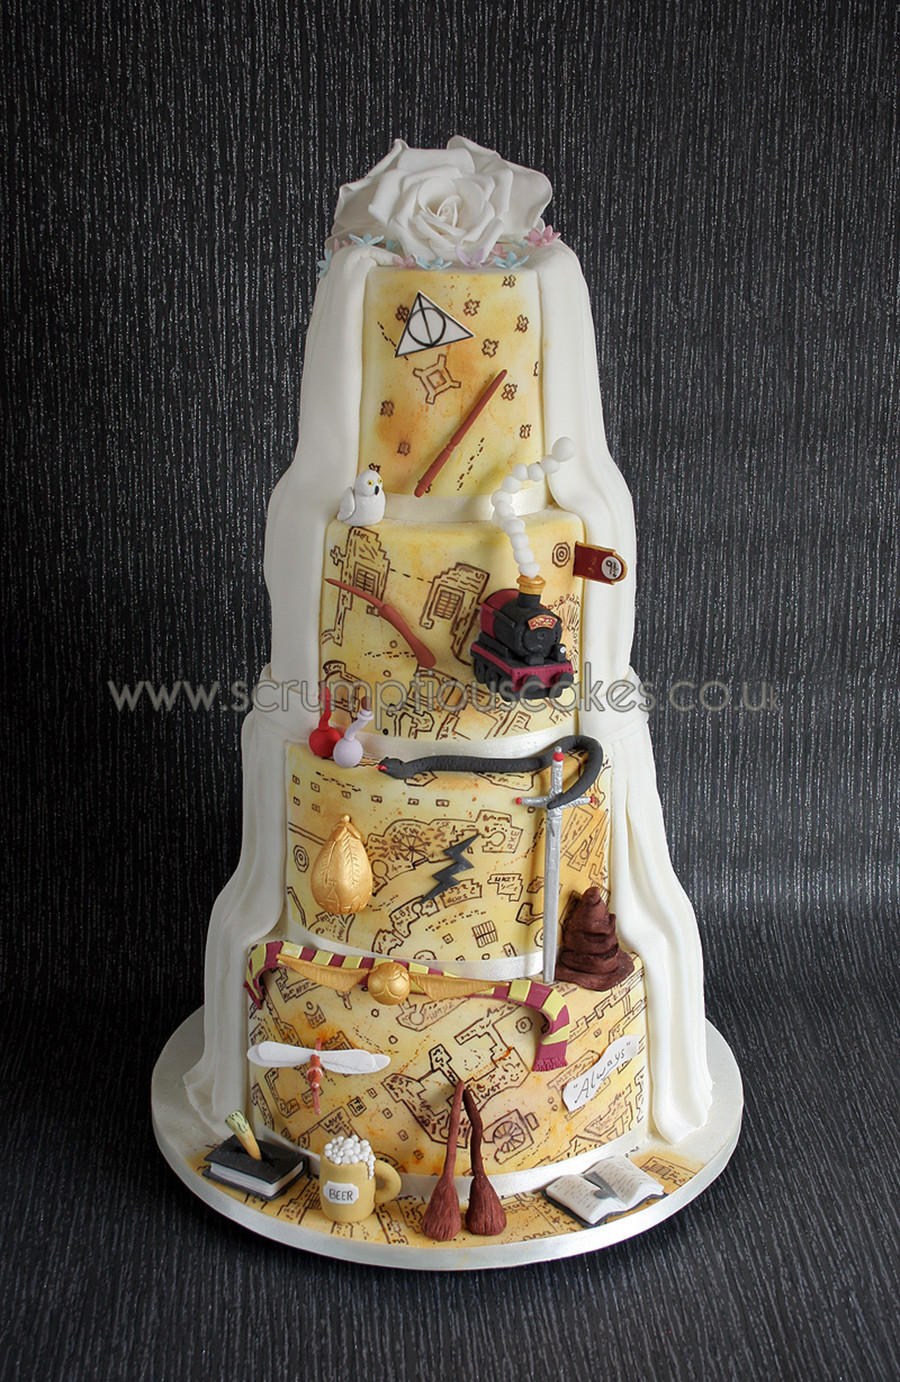 Harry Potter Wedding Cake
 Harry Potter Wedding Cake CakeCentral